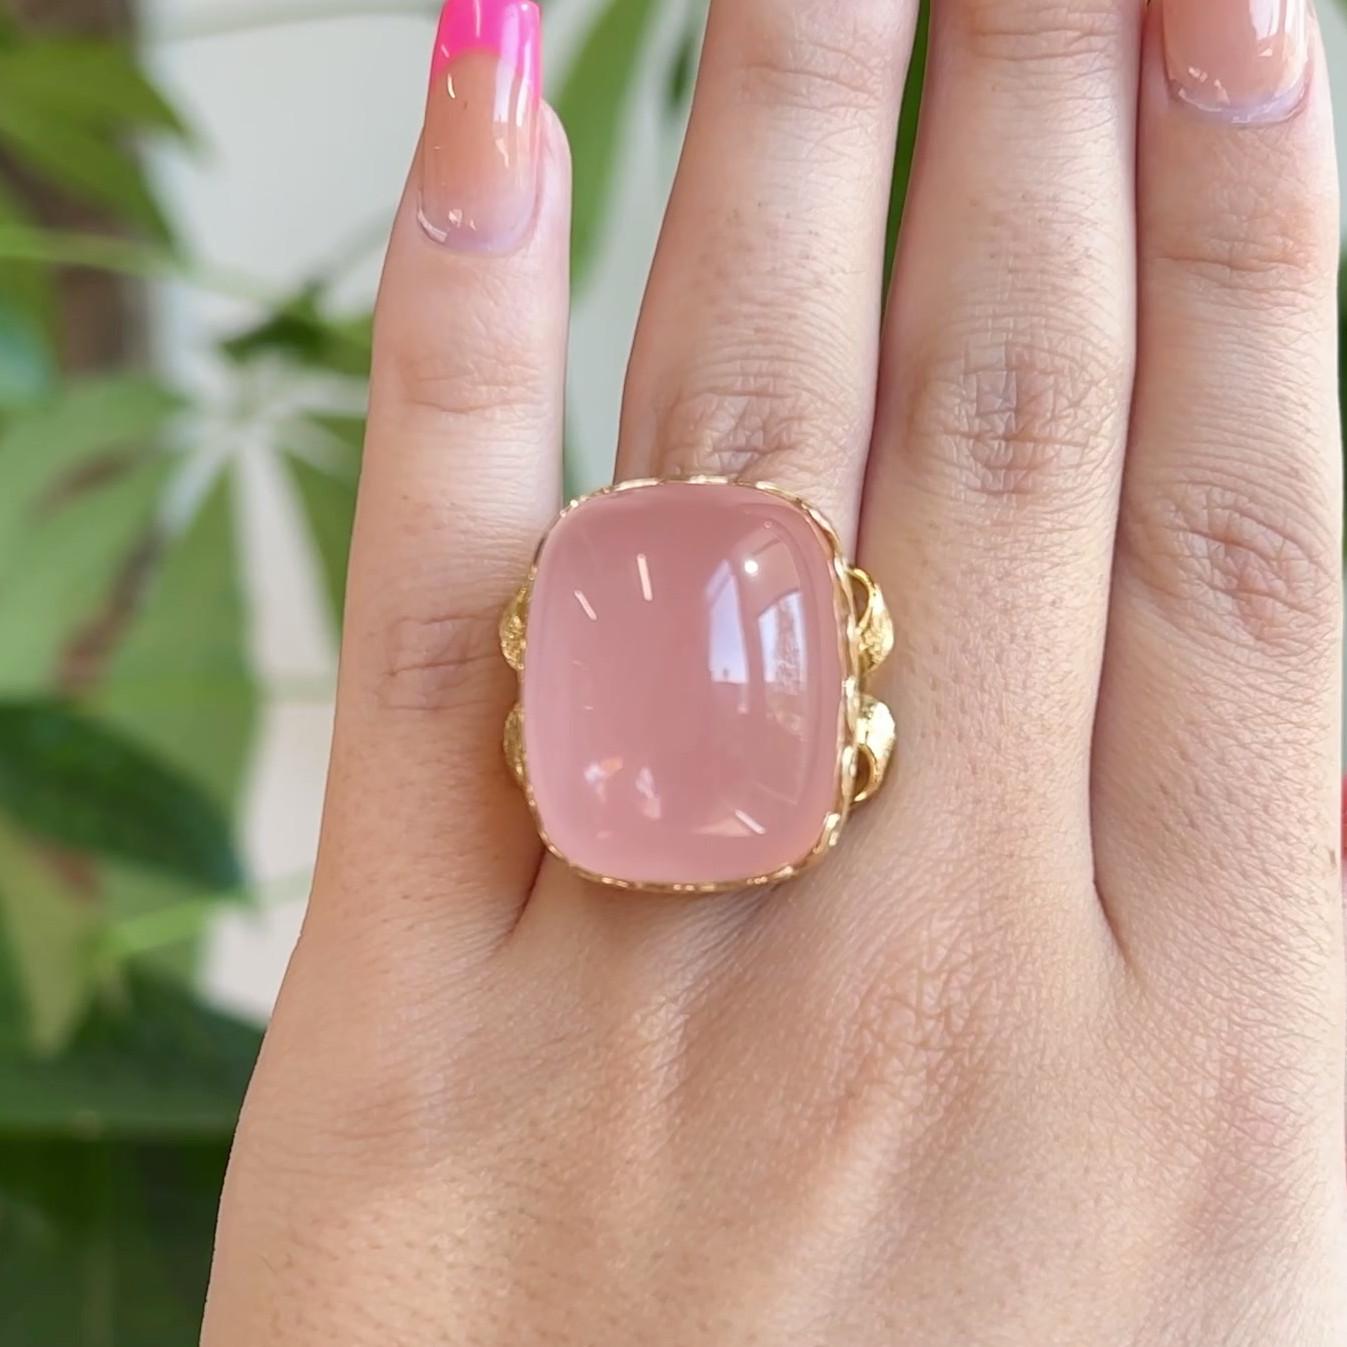 One Vintage Cabochon 77.40 Carat Rose Quartz 18 Karat Yellow Gold Textured Wave Ring. Featuring one cabochon cut rose quartz of approximately 77.40 carats. Crafted in 18 karat yellow gold with purity marks. Circa 1980. The ring is a size 7 and may